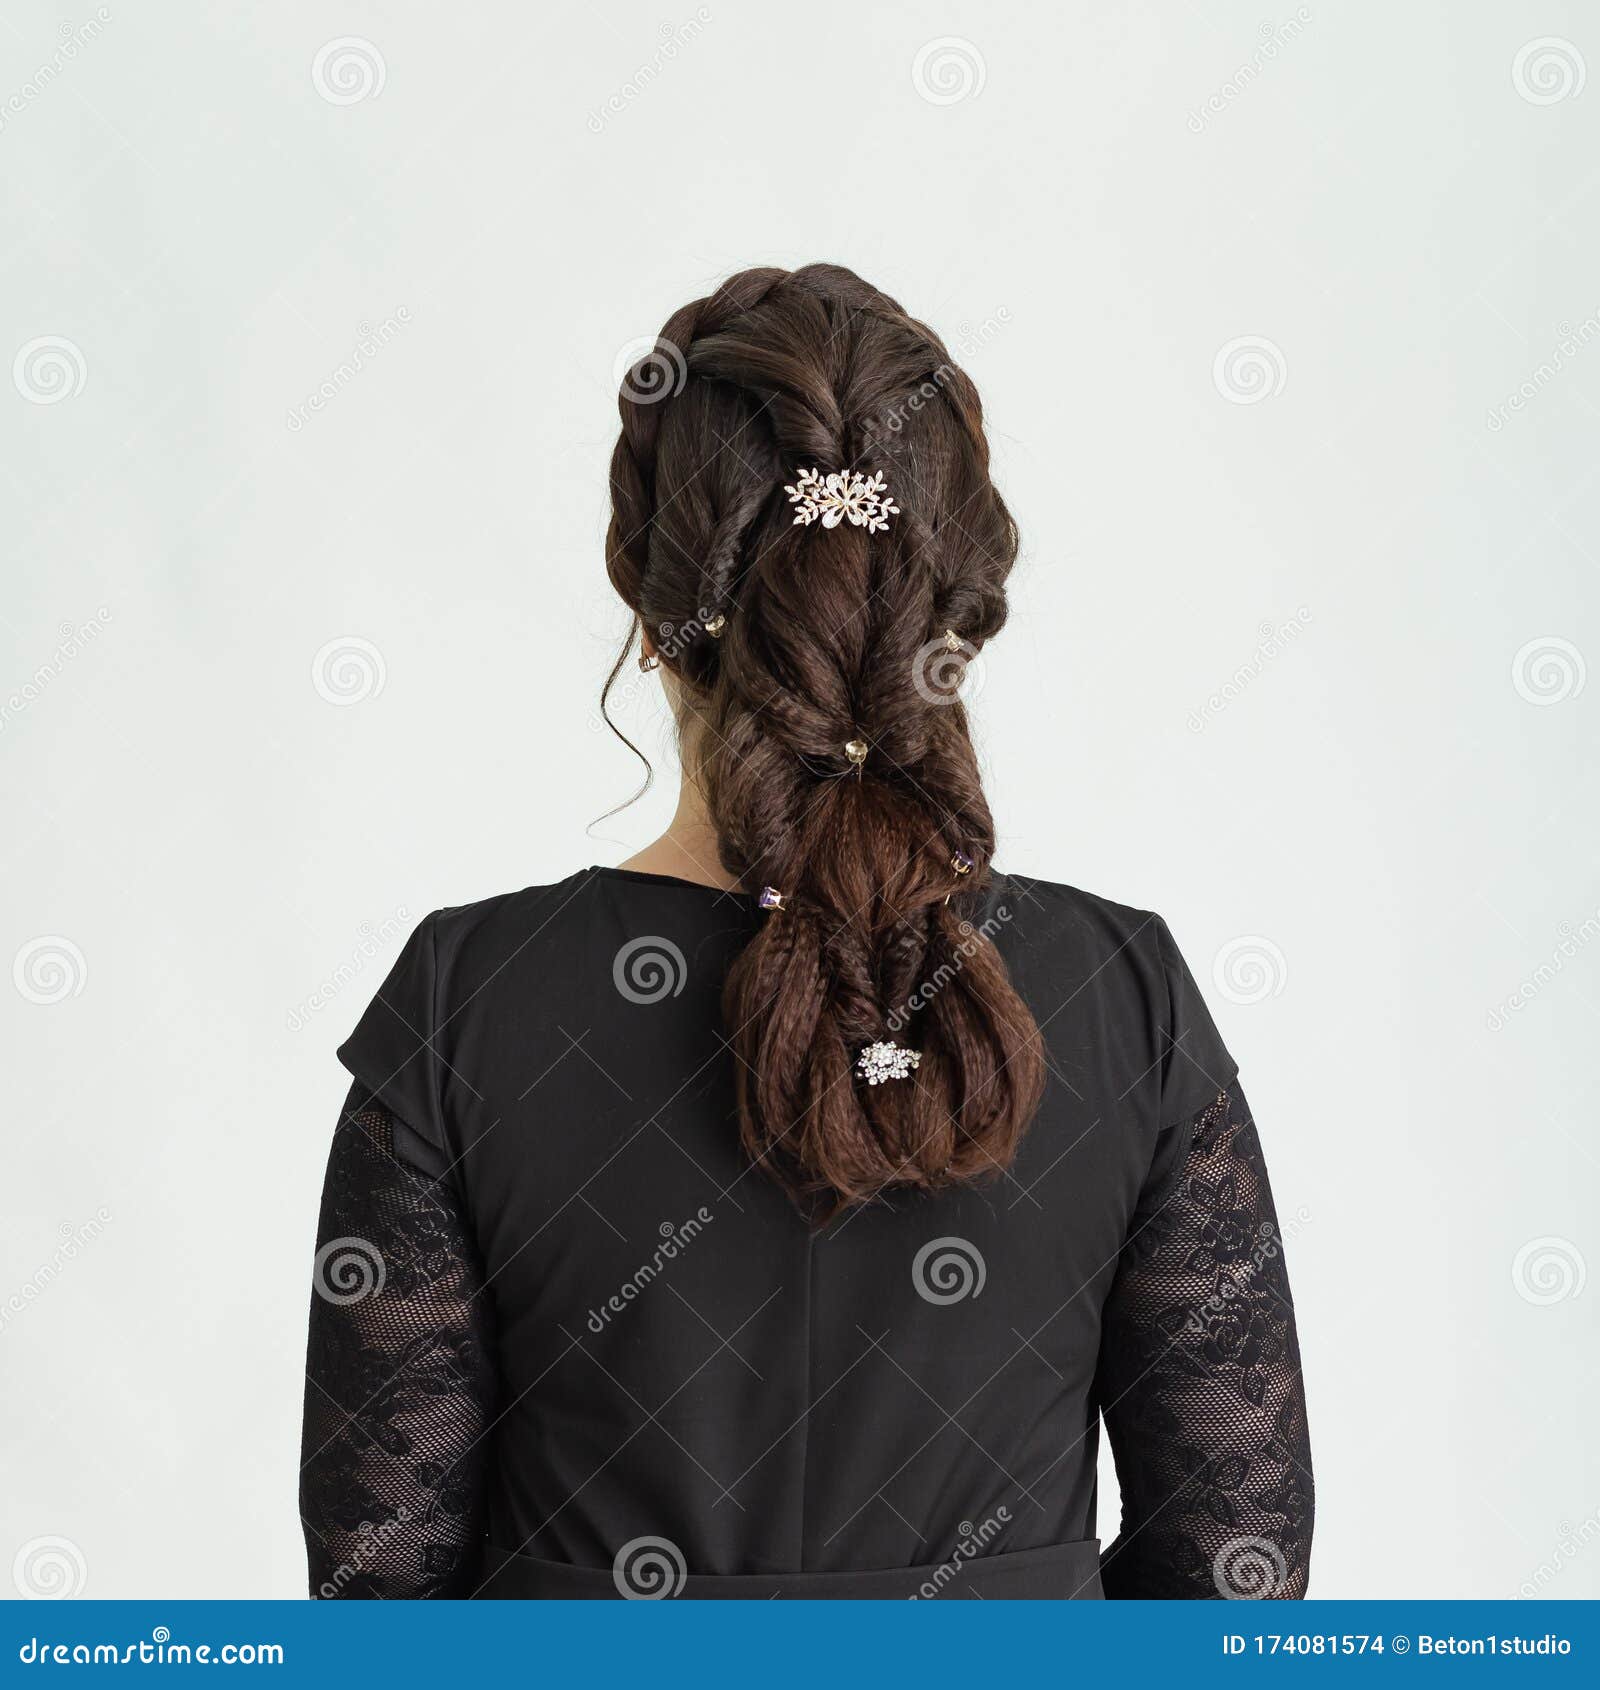 Weave, Braid Tail Hairstyle. Hairstyle on Brown Hair Woman with Long Hair  on a White Ay Background. Professional Hairdressing Stock Photo - Image of  highlights, care: 174081574